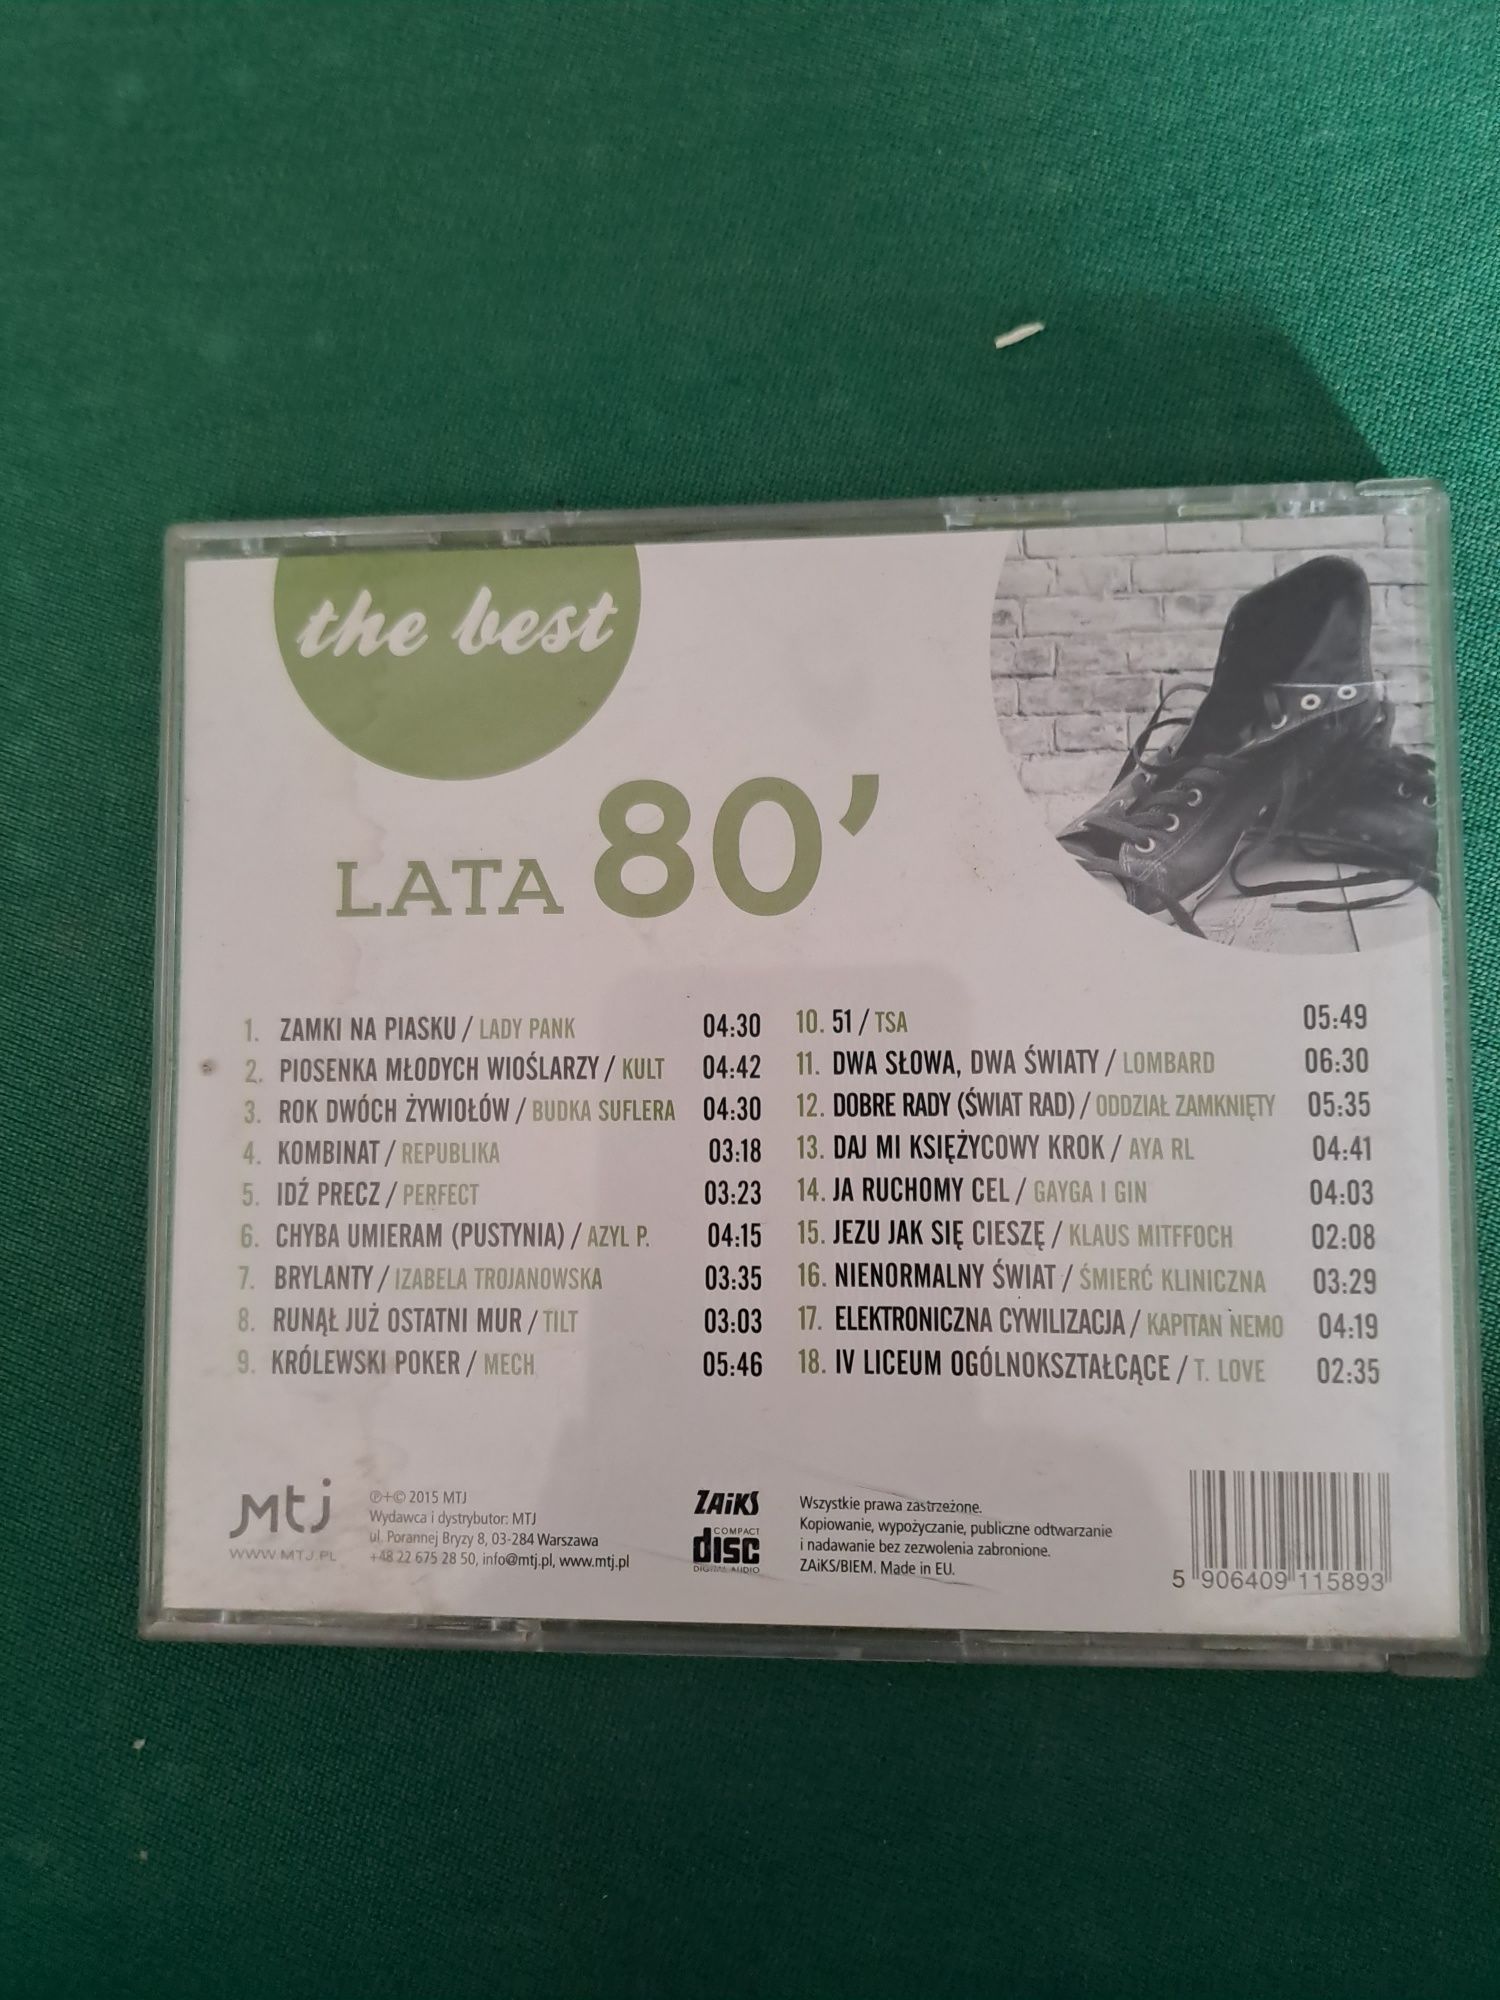 The Best lata 80